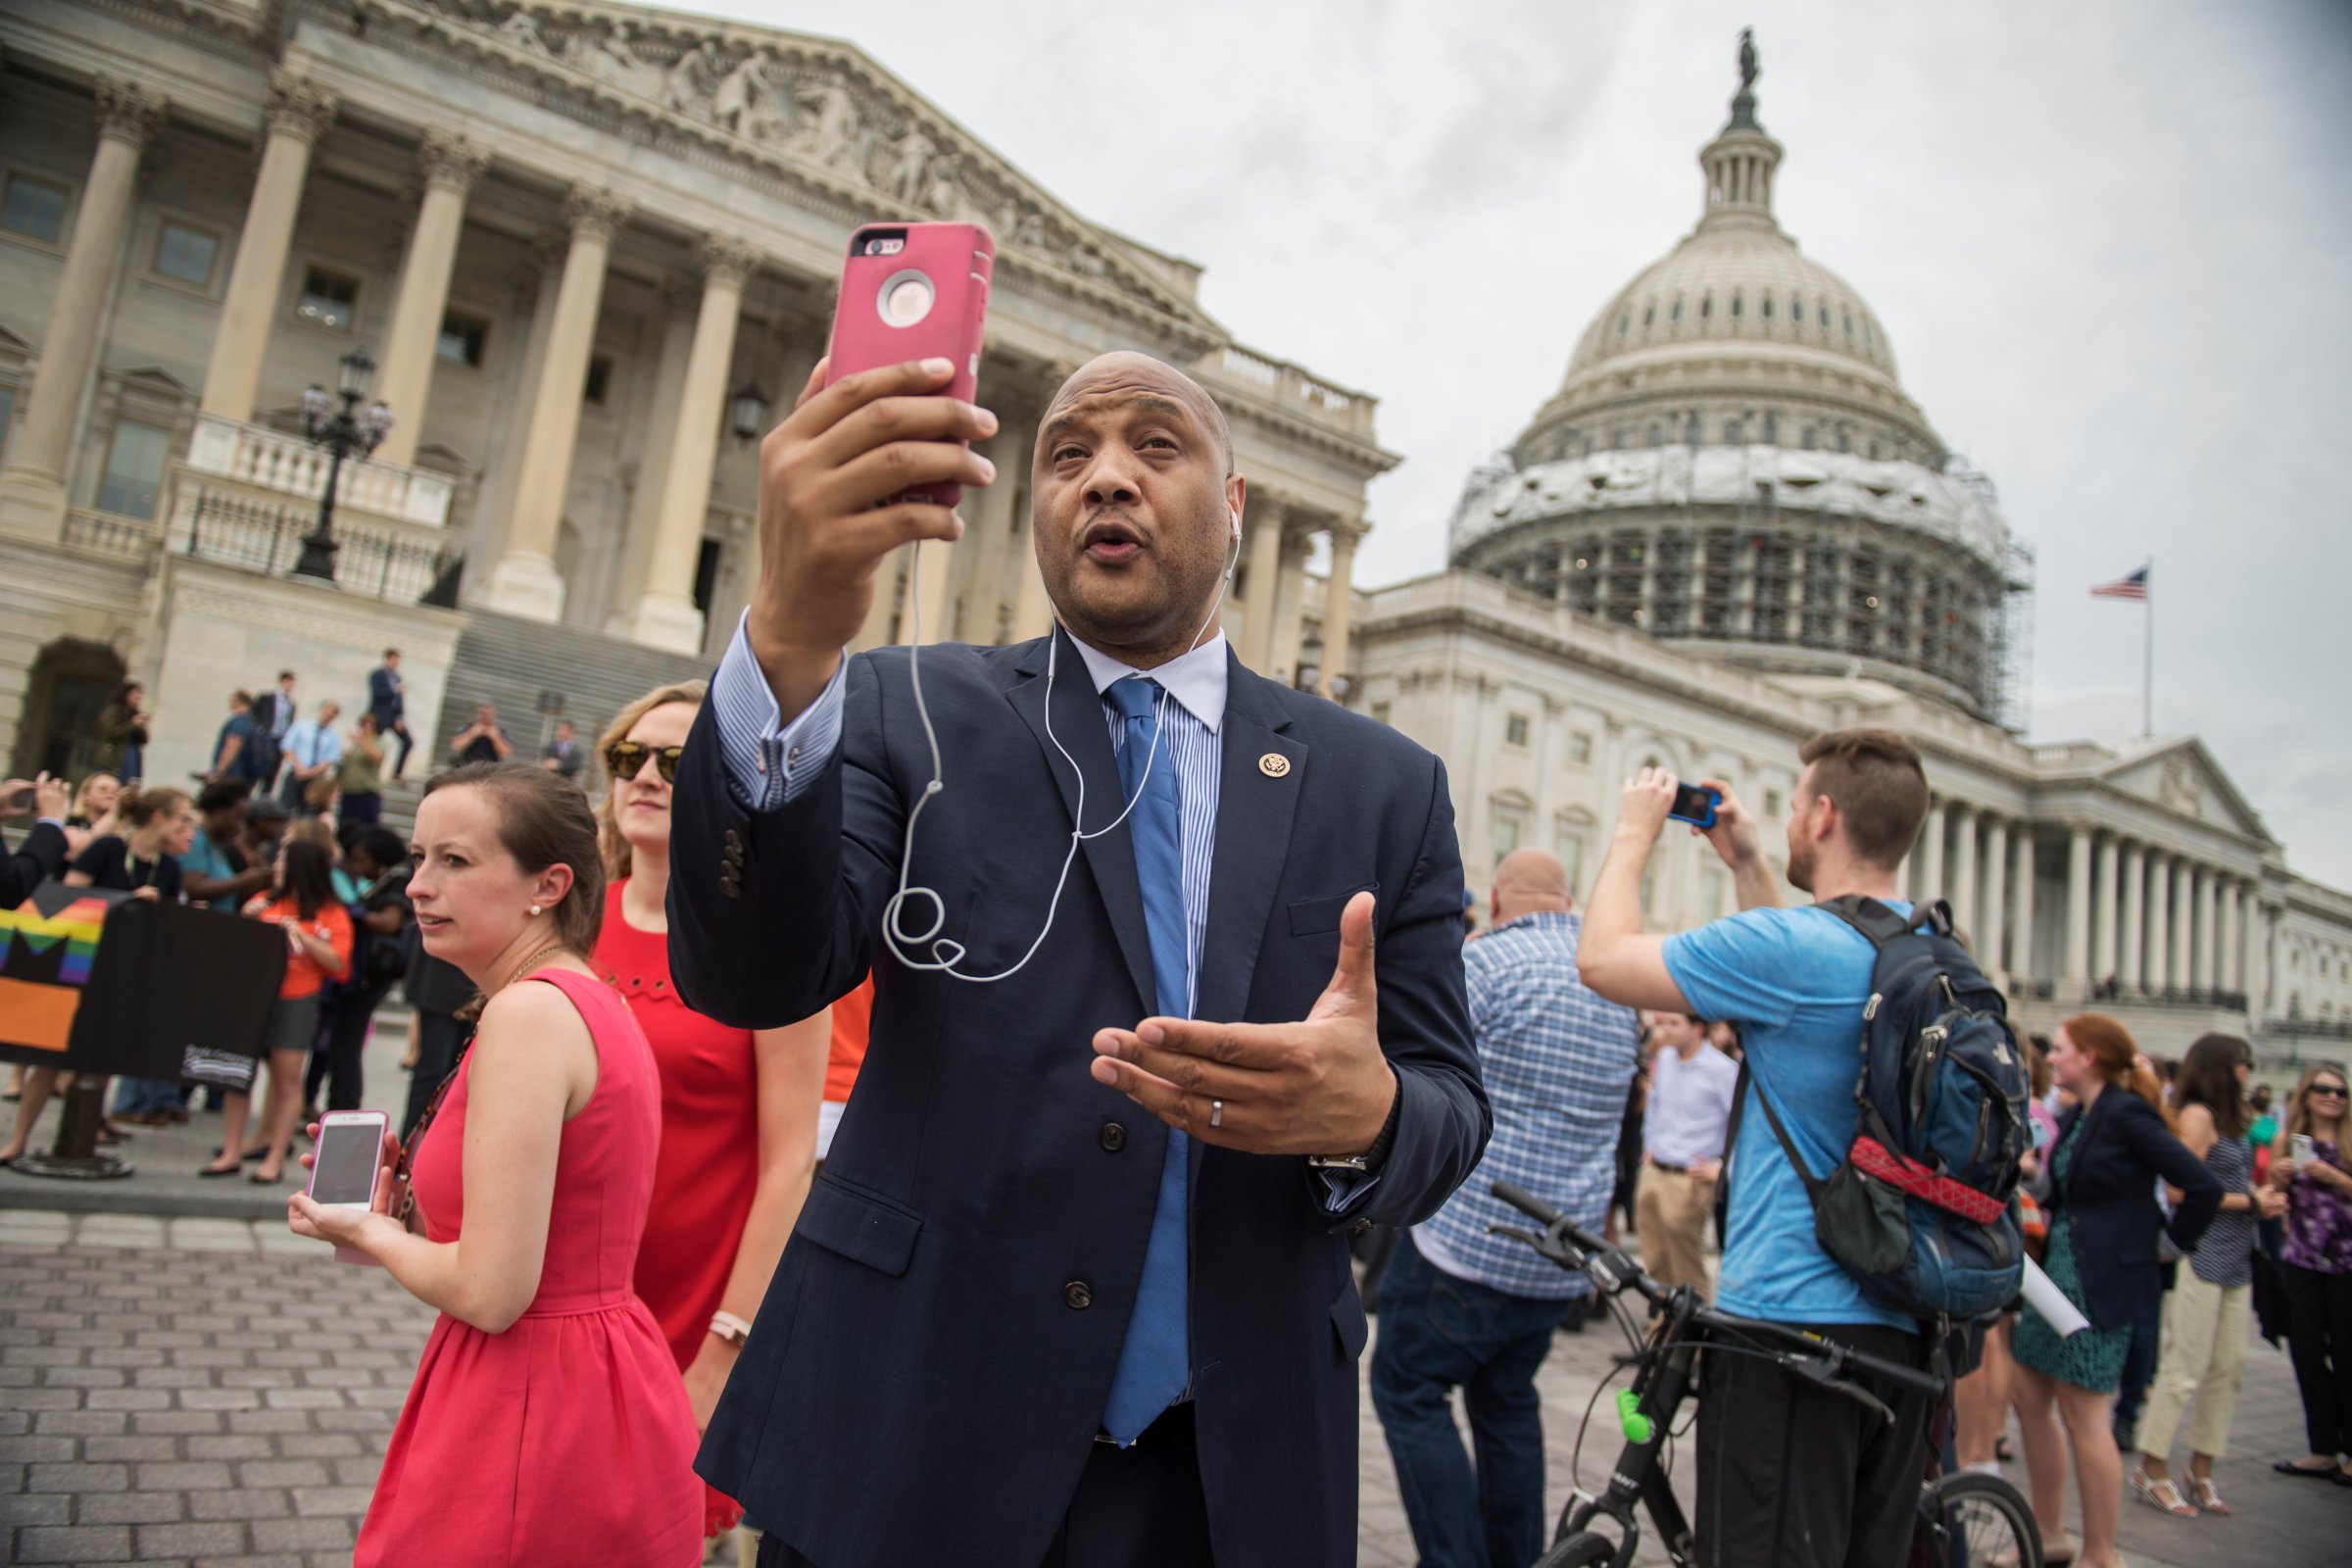 Rep. Andre Carson, D-Ind., concurs an interview via FaceTime on the East Front of the Capitol after the House Democrats' sit-in ended on the floor, June 23, 2016.